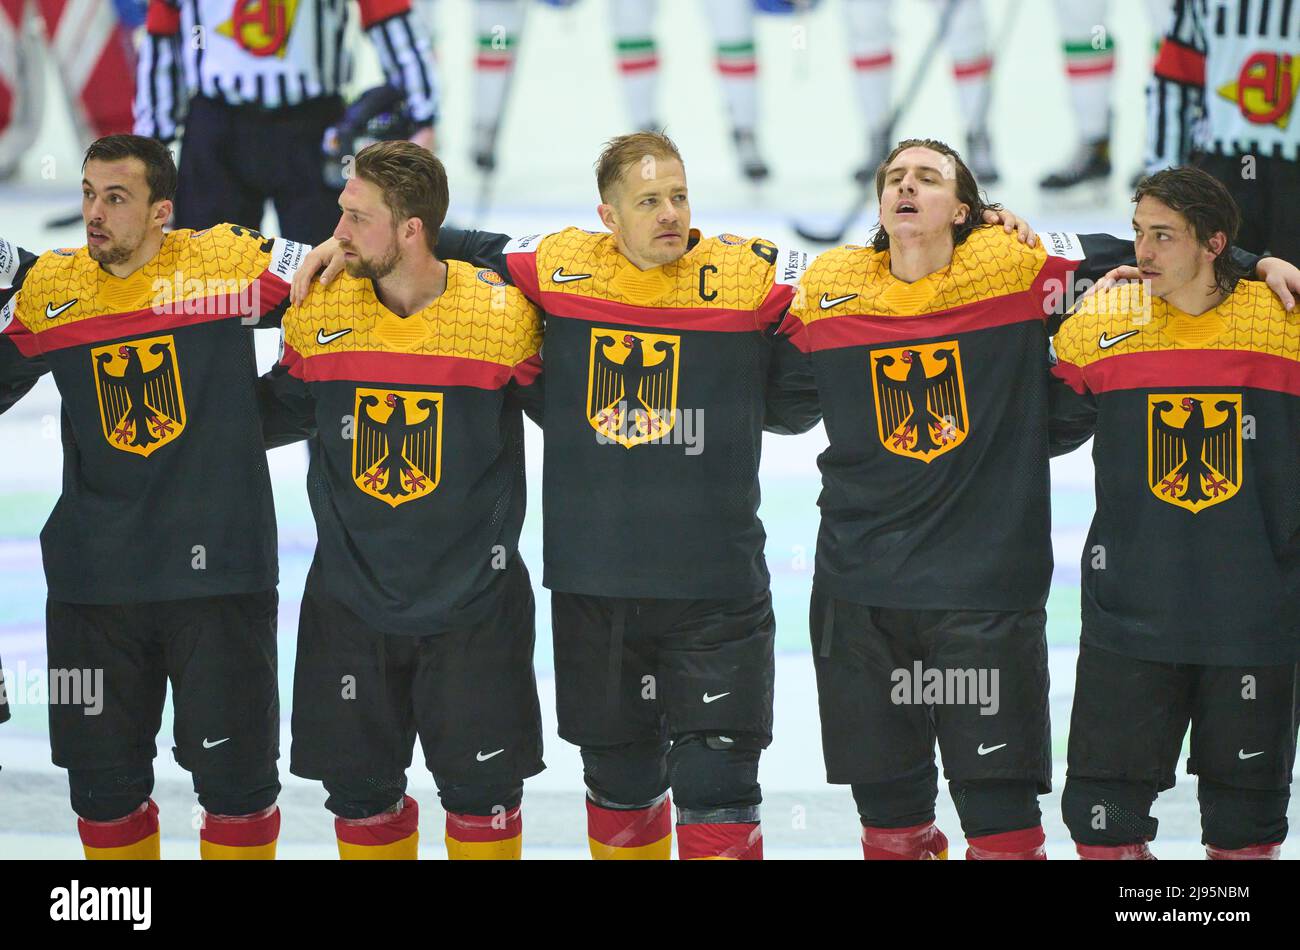 DEB team at anthem, Fabio Wagner Nr.38 of Germany Maximilian Kastner Nr.7 of Germany  Moritz Müller, Mueller Nr.91 of Germany Leon Gawanke Nr.9 of Germany Daniel Fischbuch Nr.77 of Germany  in the match GERMANY - ITALY 9-4 of the IIHF ICE HOCKEY WORLD CHAMPIONSHIP Group B  in Helsinki, Finland, May 20, 2022,  Season 2021/2022 © Peter Schatz / Alamy Live News Stock Photo